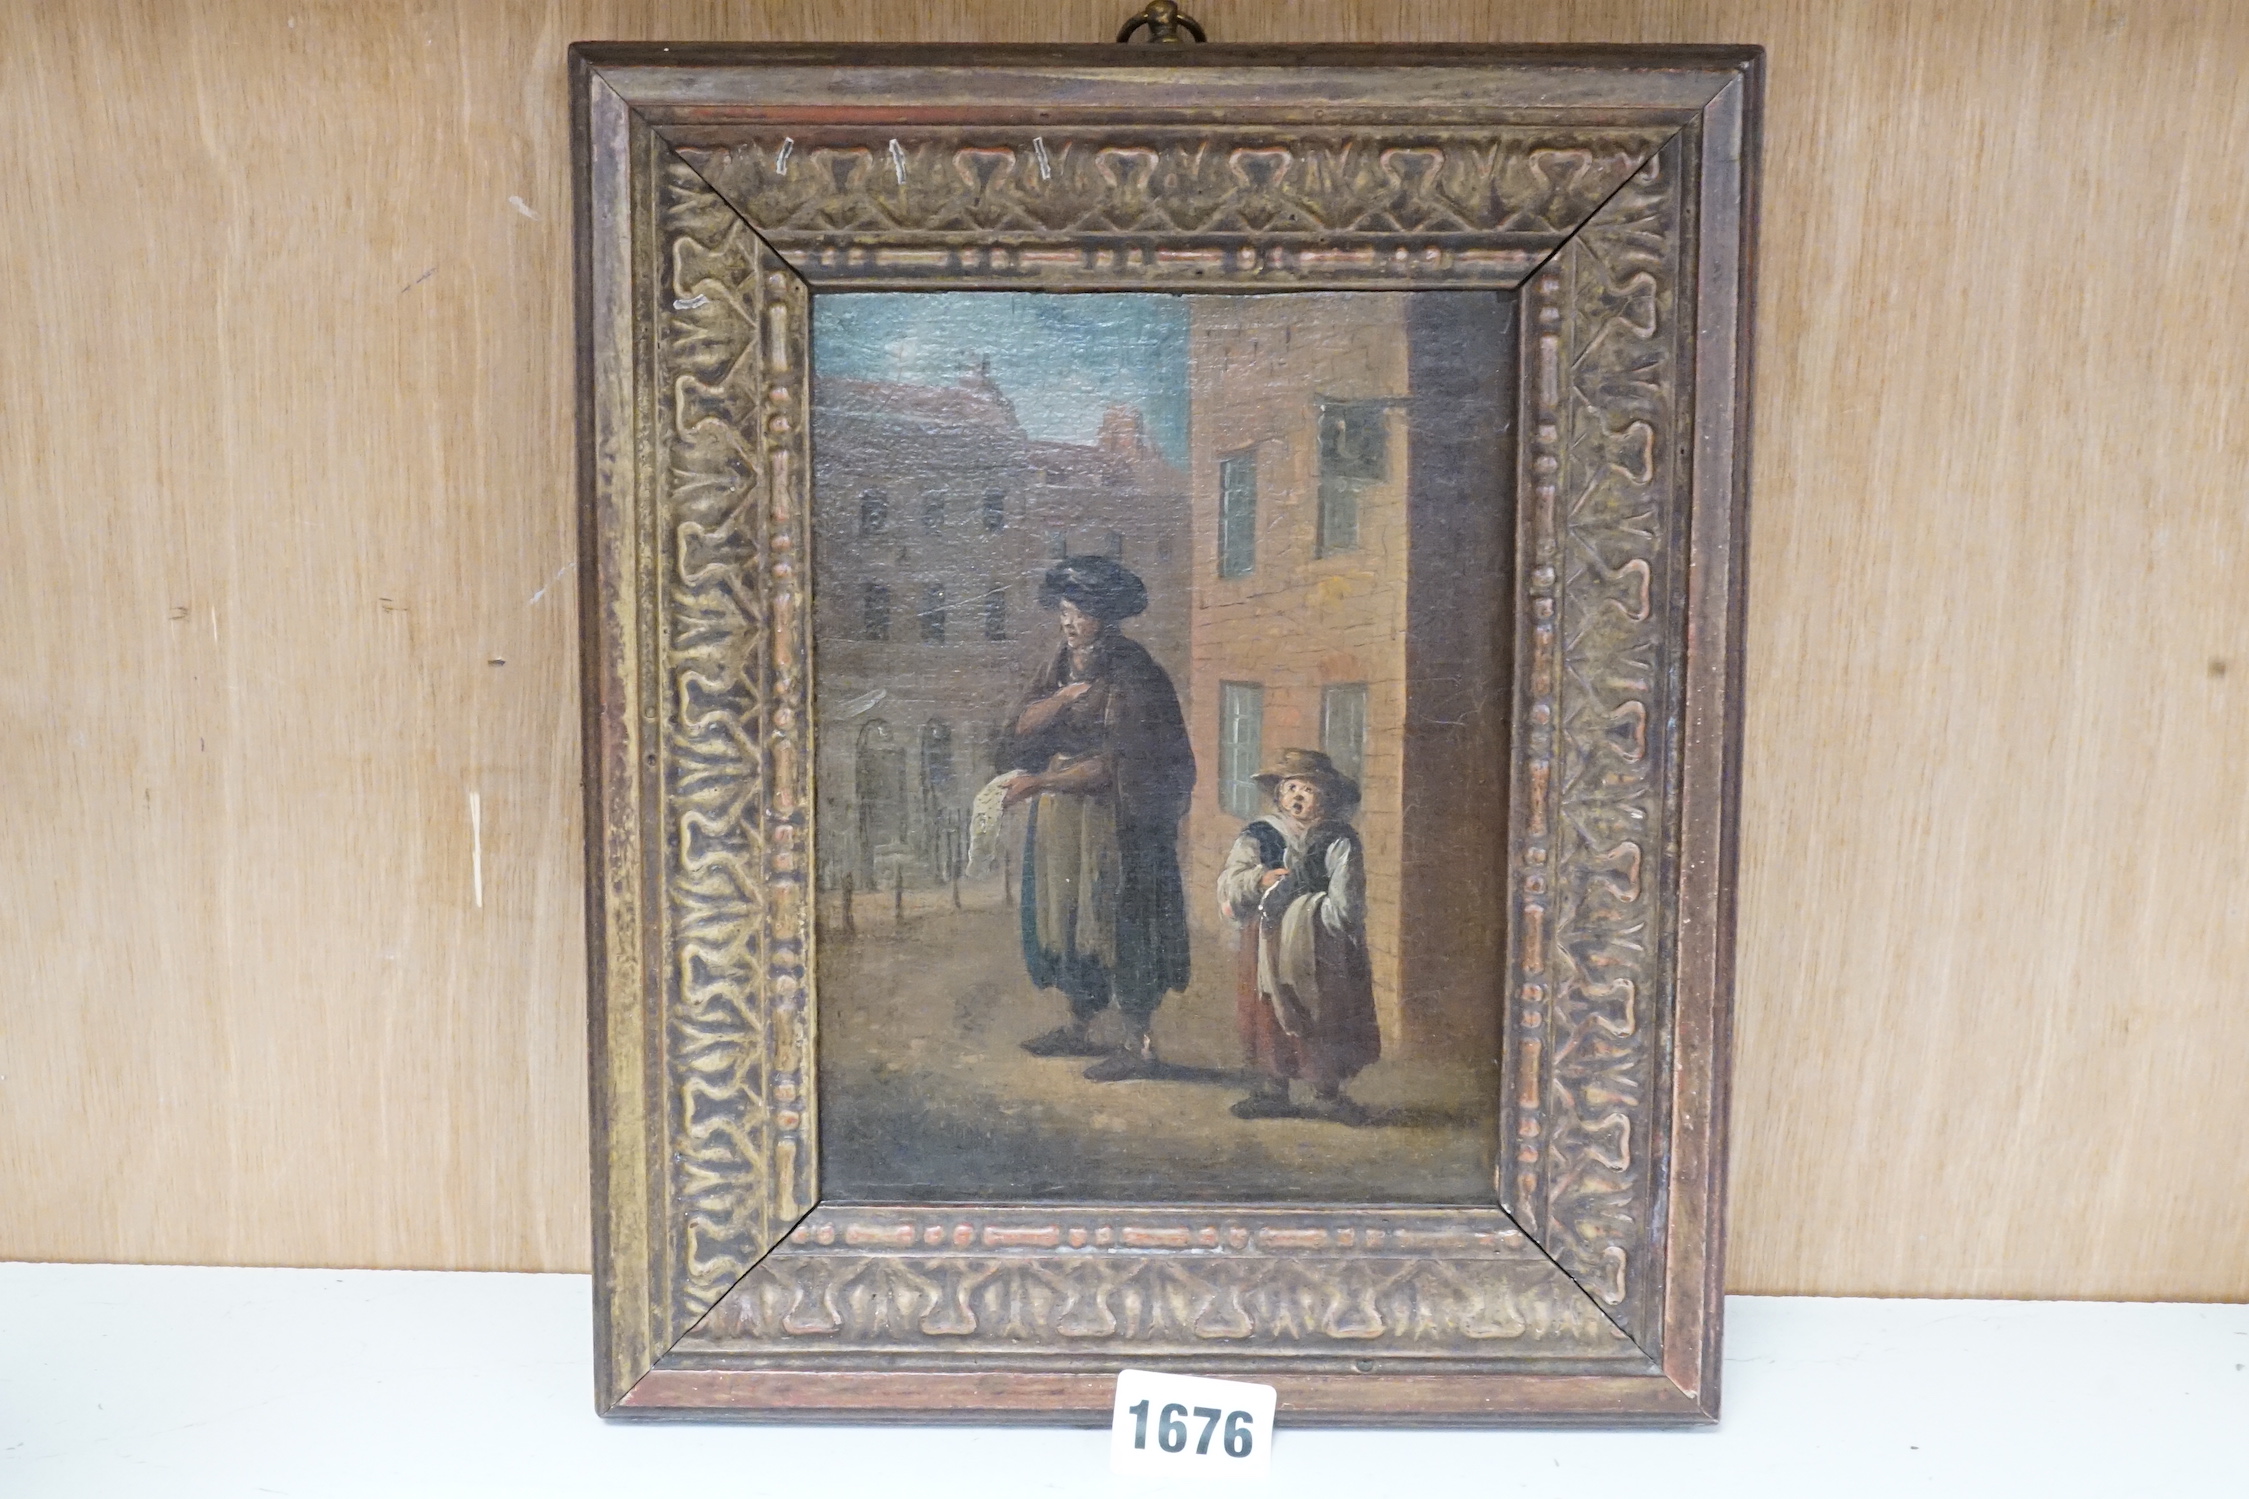 18th century English School, oil on canvas, ‘’Street vendors, one selling lace’’, 18 x 13cms.